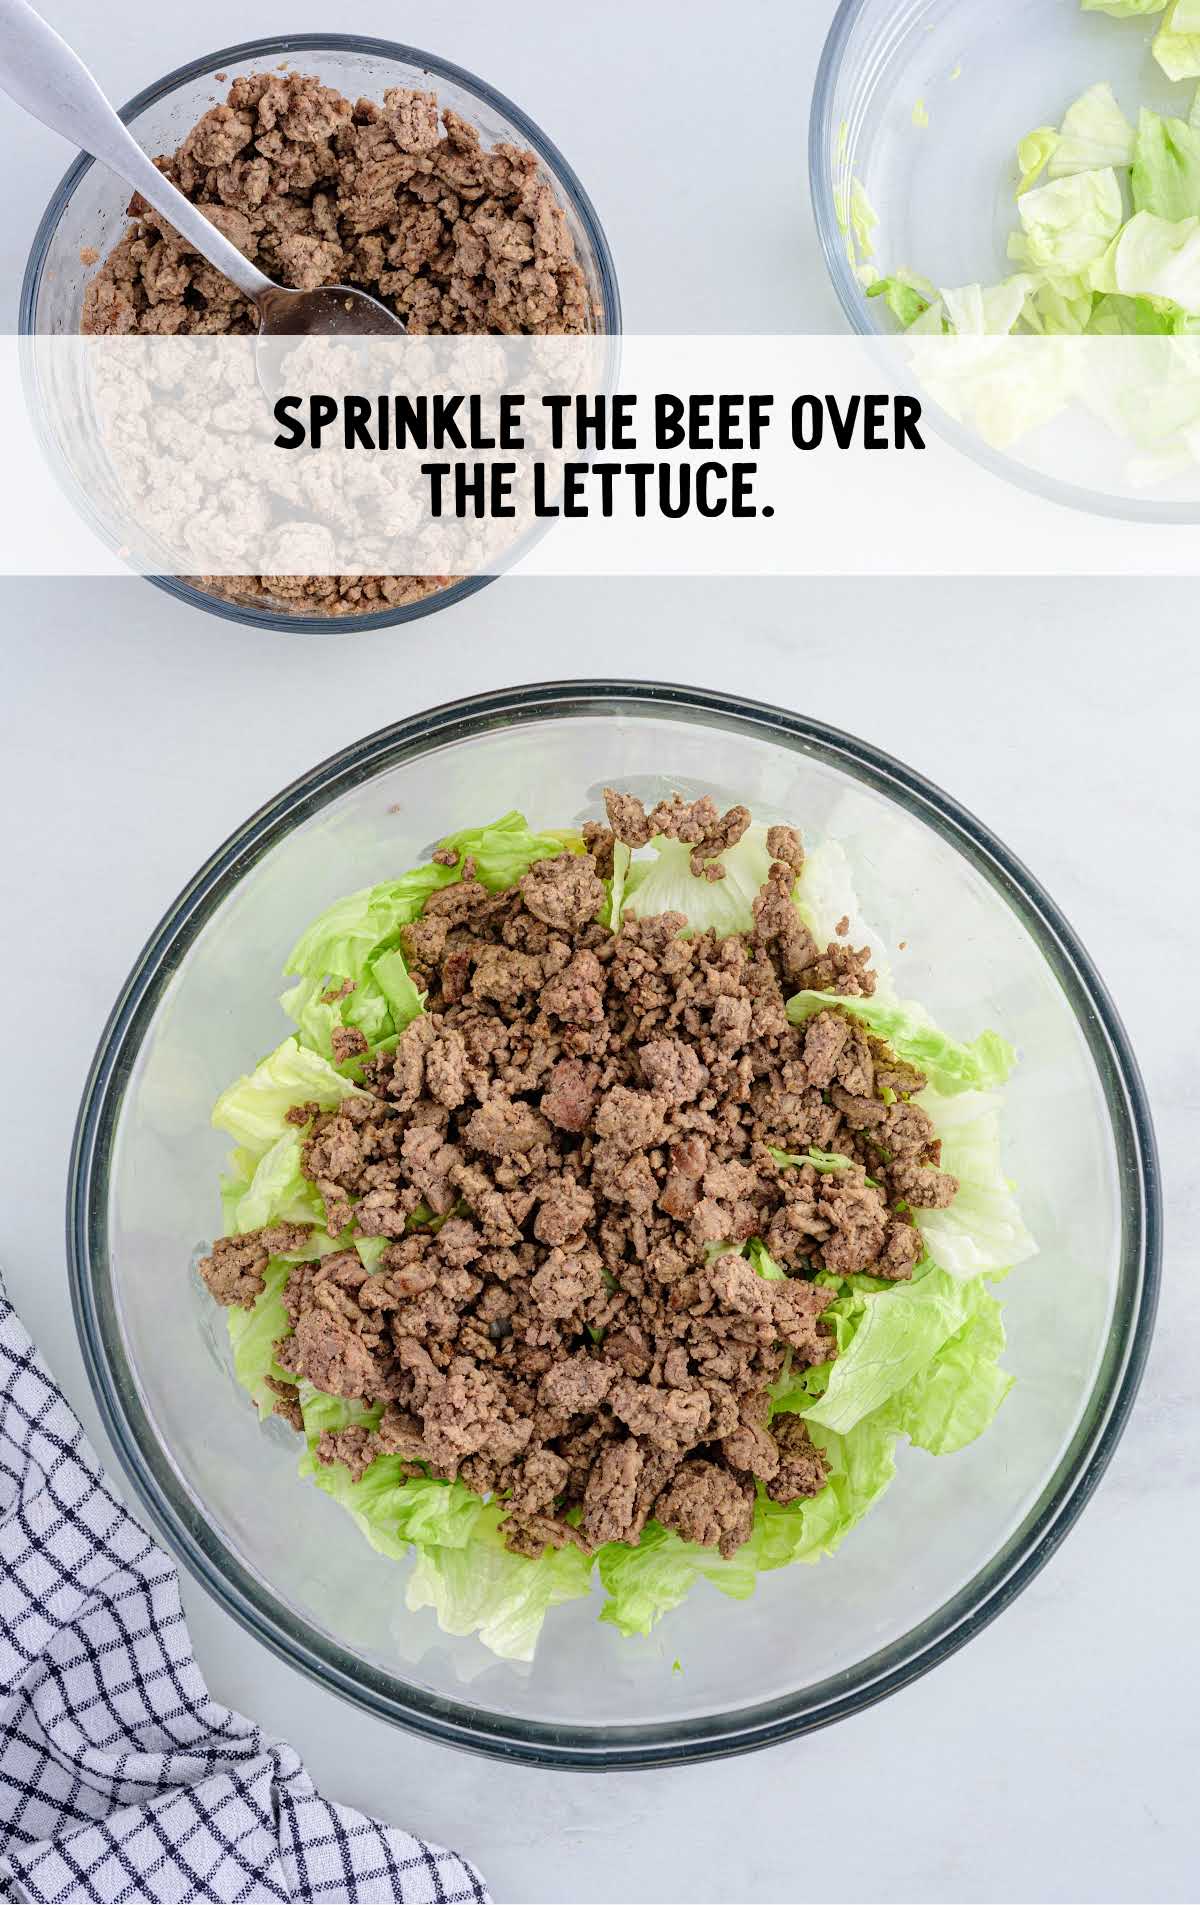 cooked ground beef added to the bowl of lettuce